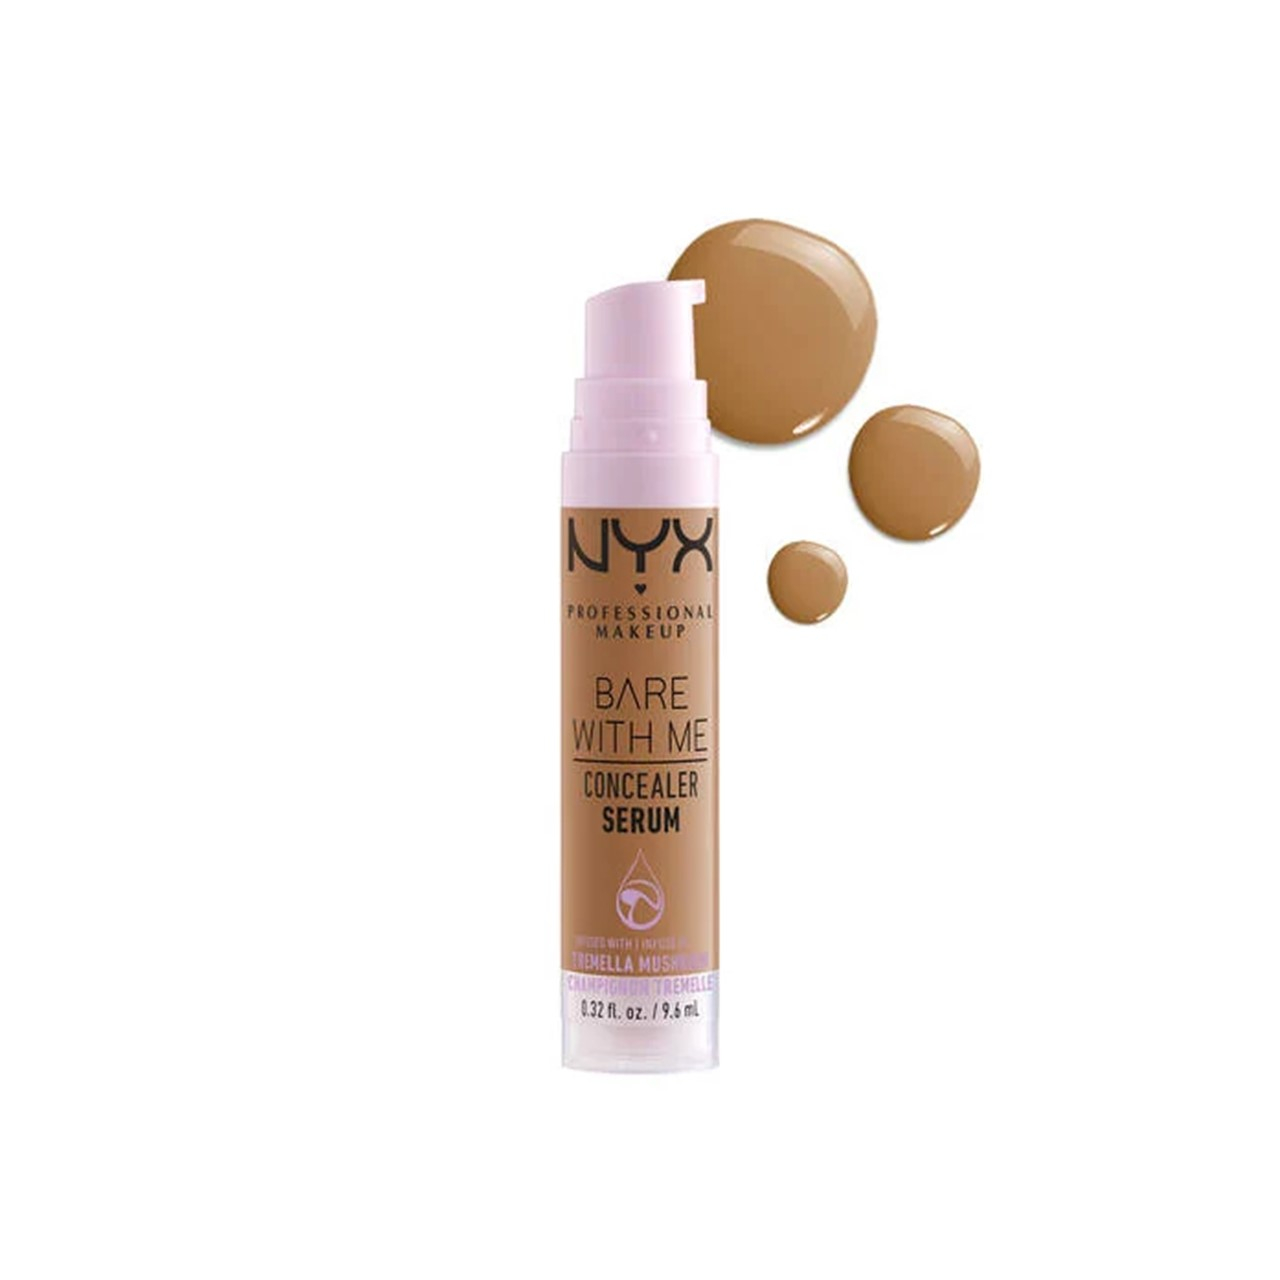  NYX PROFESSIONAL MAKEUP Bare With Me Concealer Serum, Up To  24Hr Hydration - Medium Vanilla : Pet Supplies